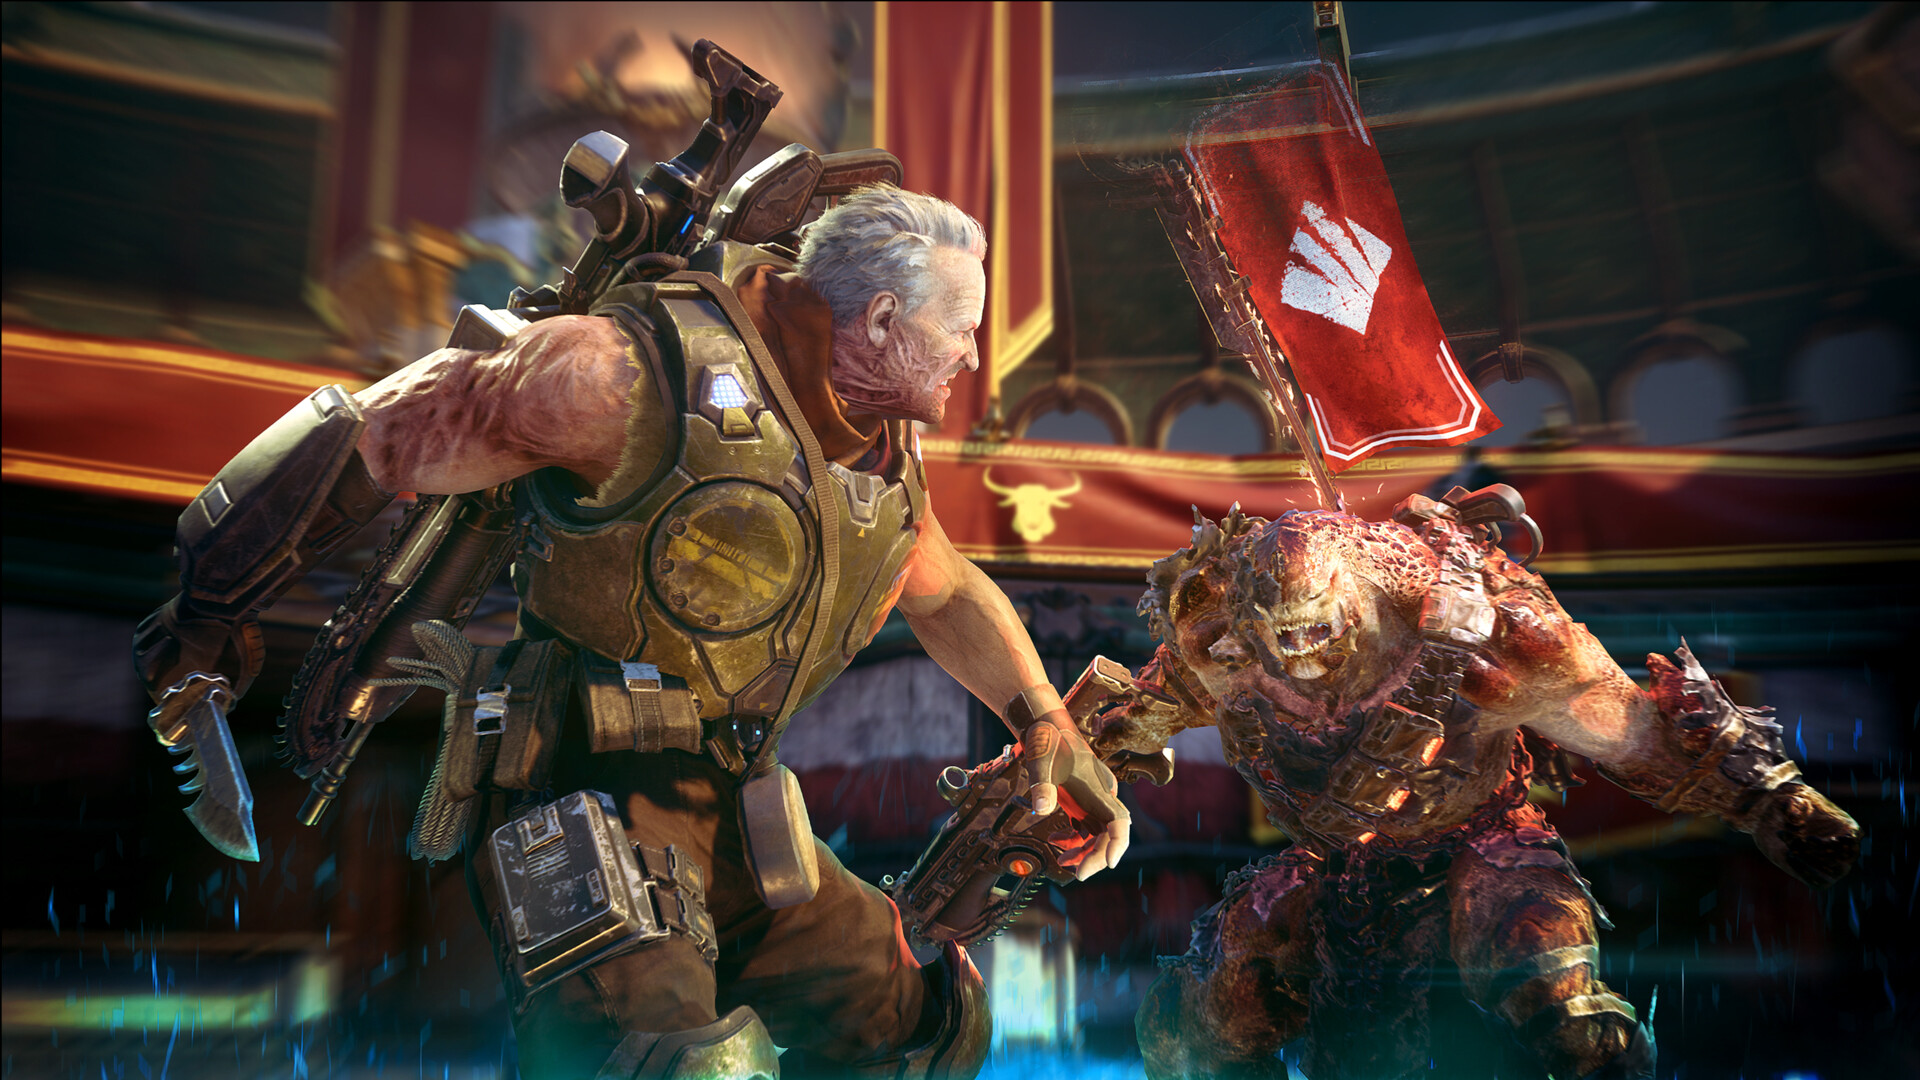 Gears 5 Operation 4: Brothers in Arms adds 24 new achievements — including  more Re-ups